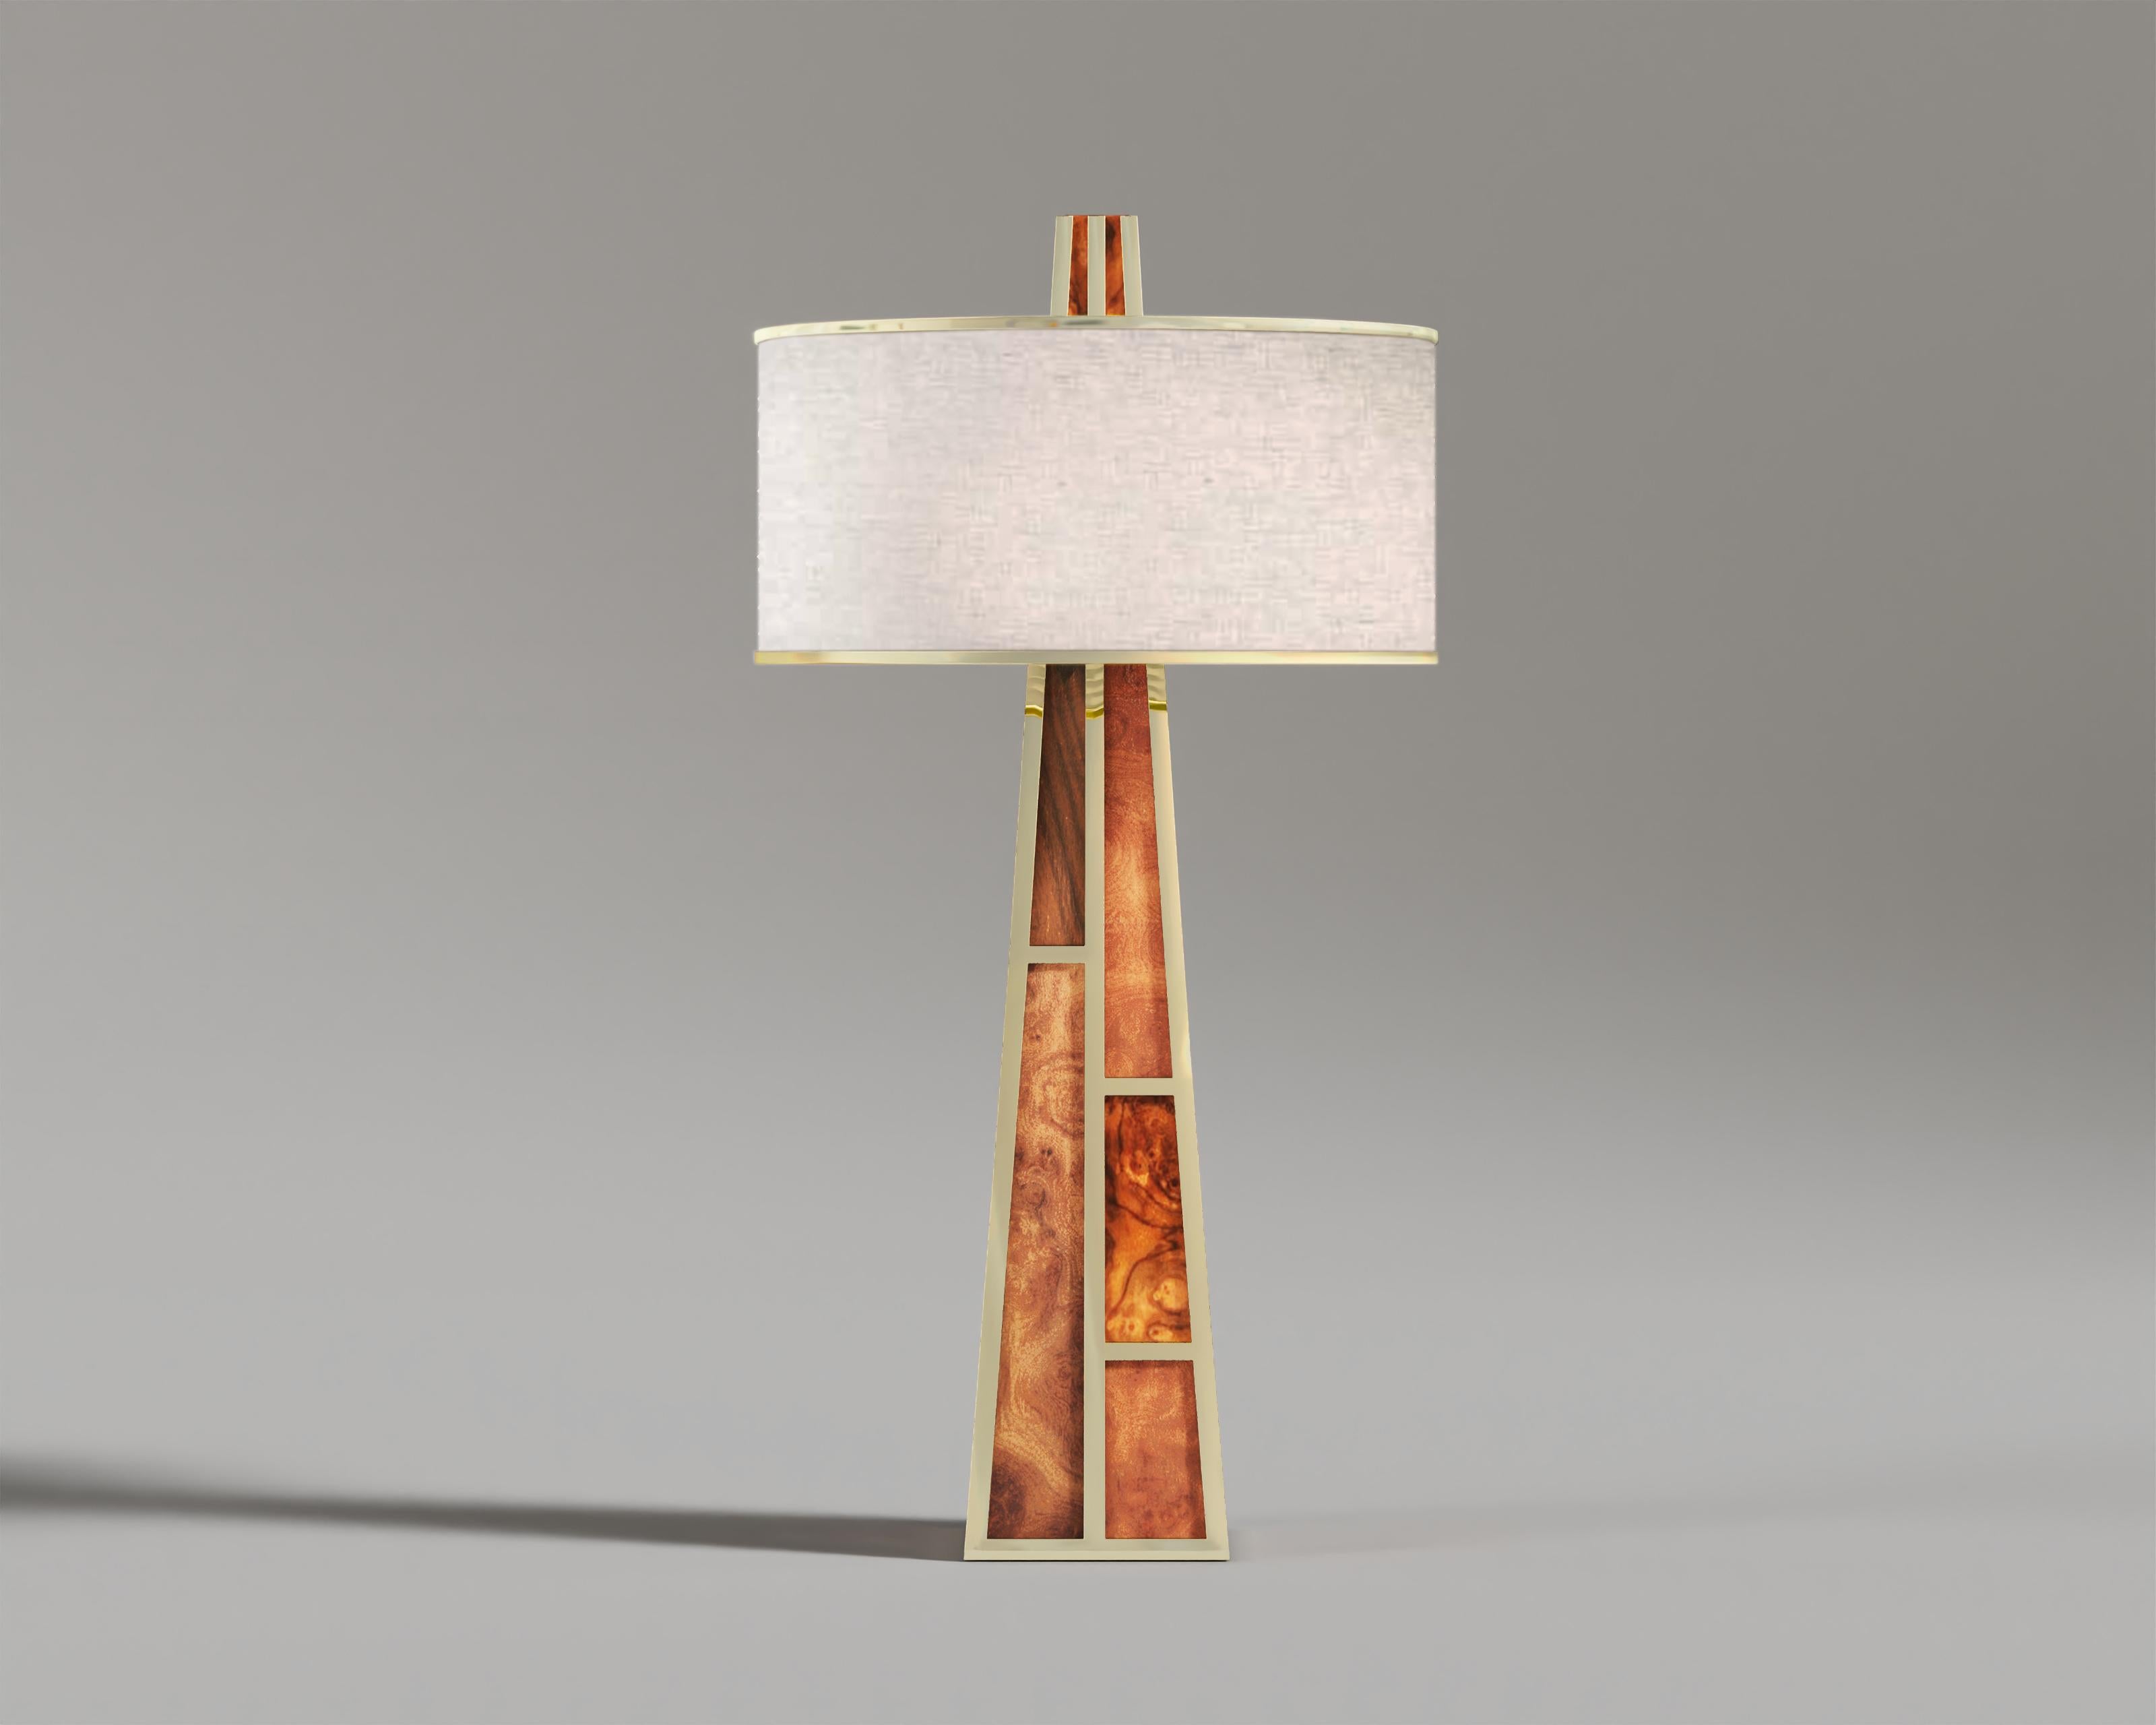 Emerald Table Lamp Wood

Like the Emerald Console Table, Emerald Table Lamp also celebrate the heritage of traditional sophistication along with the freshness of modern bravery.
Crafted from highly polished bronze and a selection of exquisite